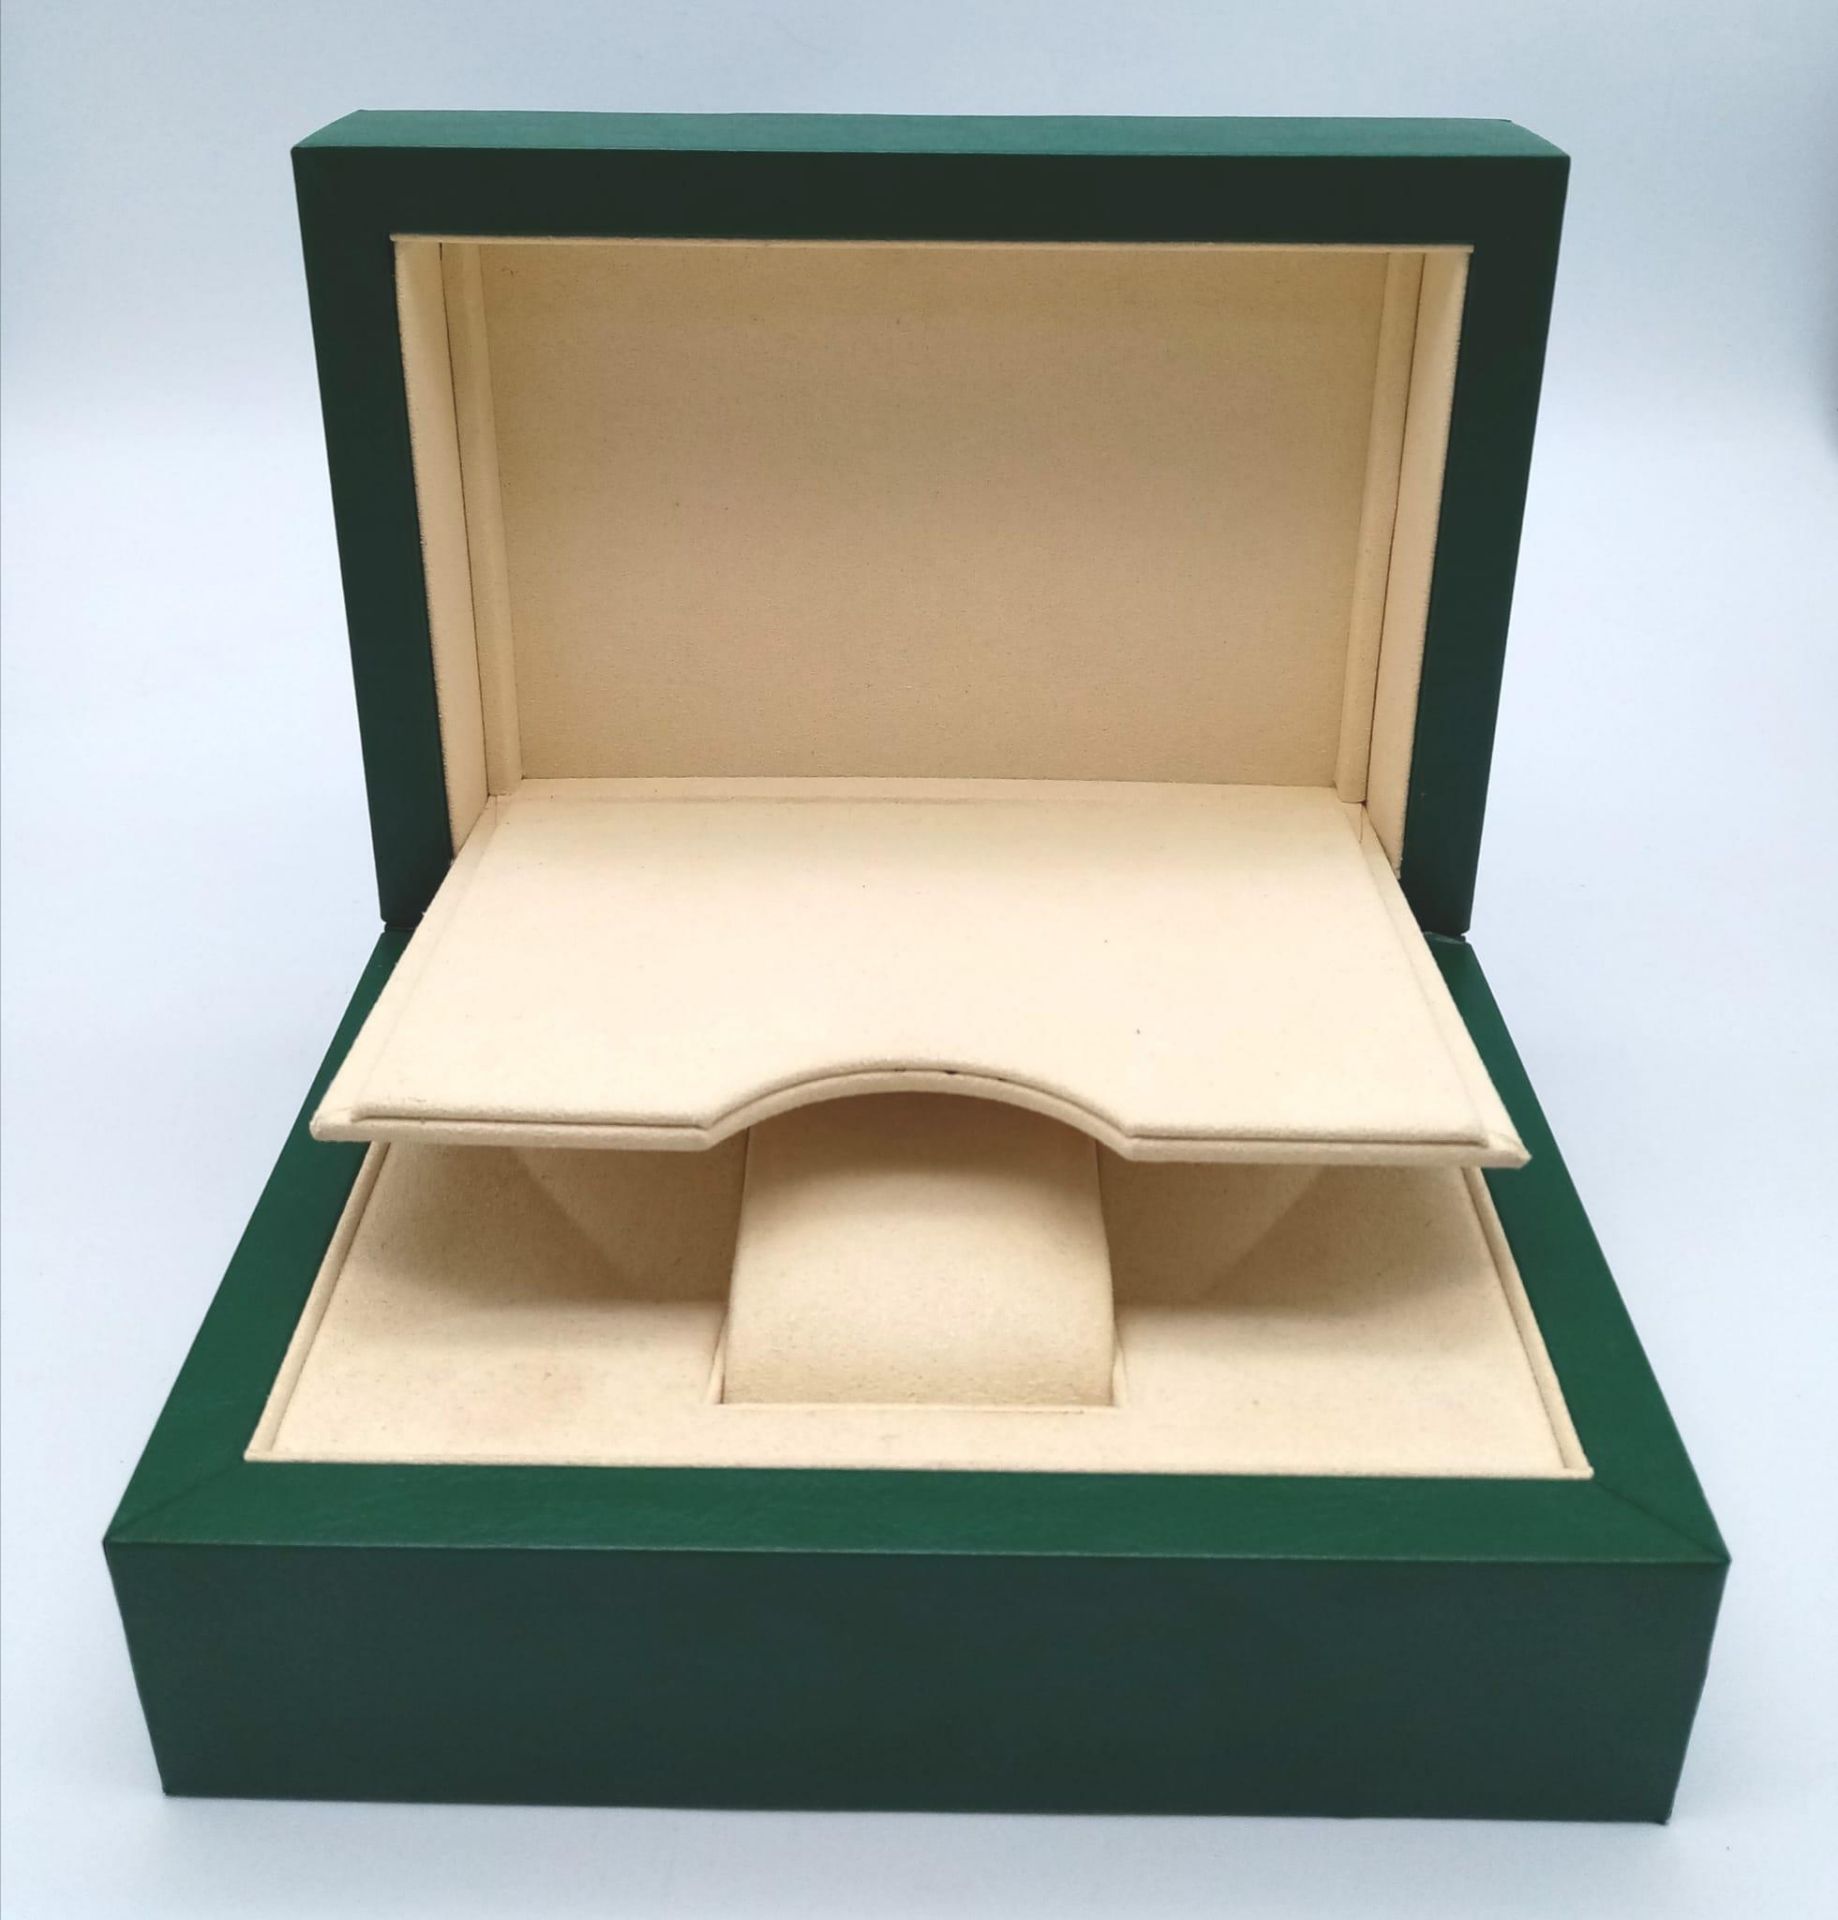 A Rolex Watch Case. Green ruffled exterior. Single watch space interior. 18cm x 13cm - Image 10 of 13